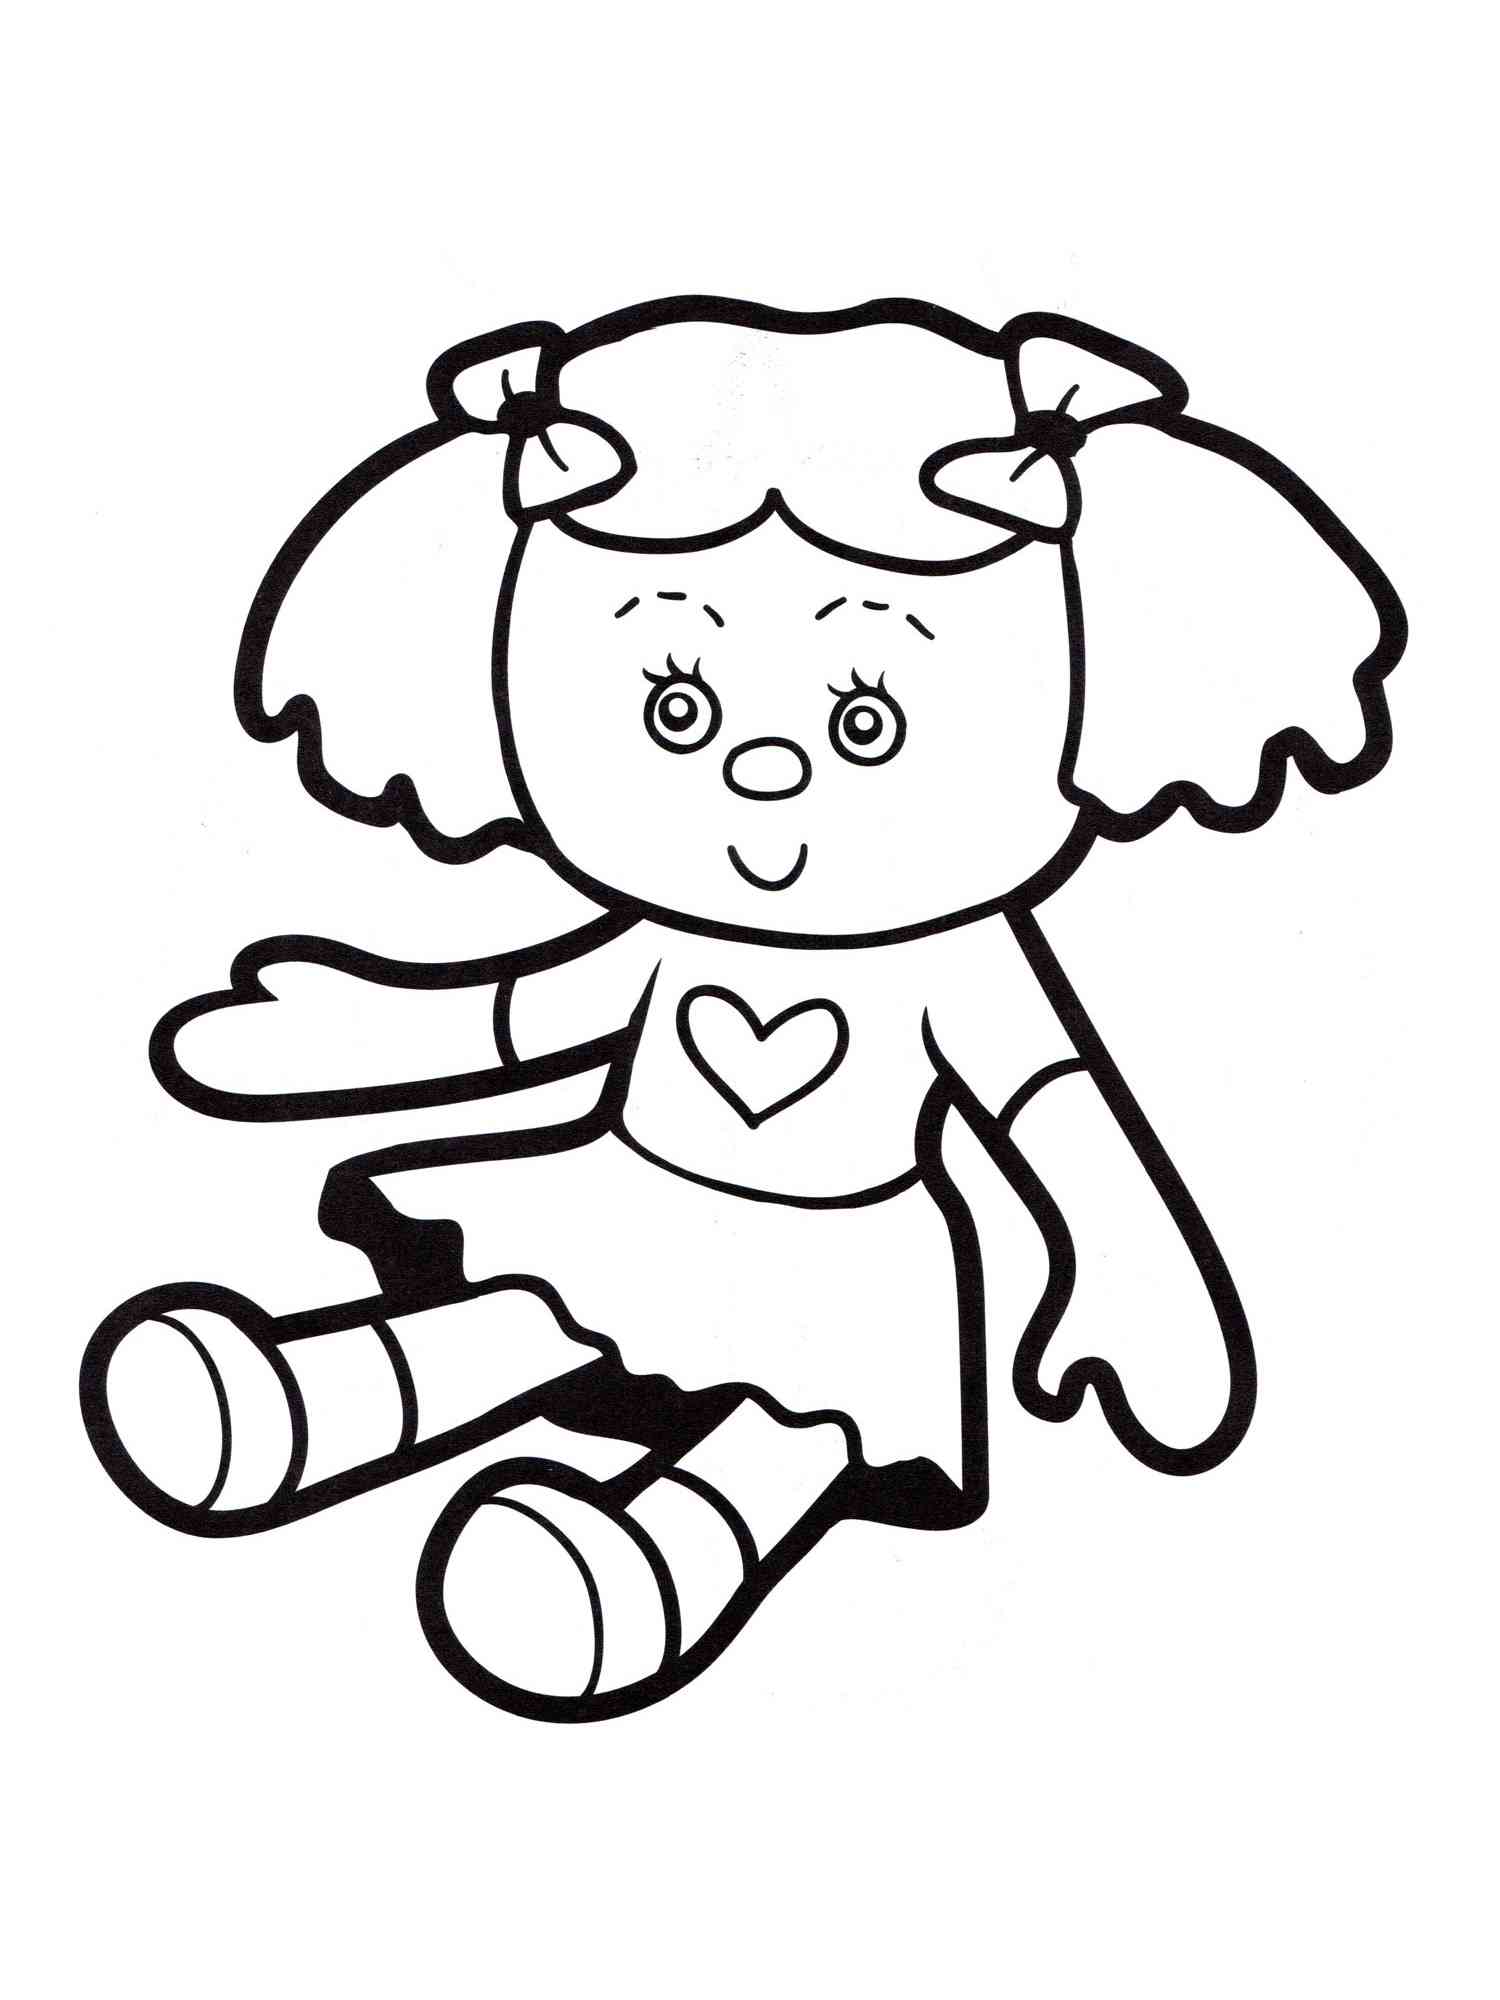 doll coloring pages for girls